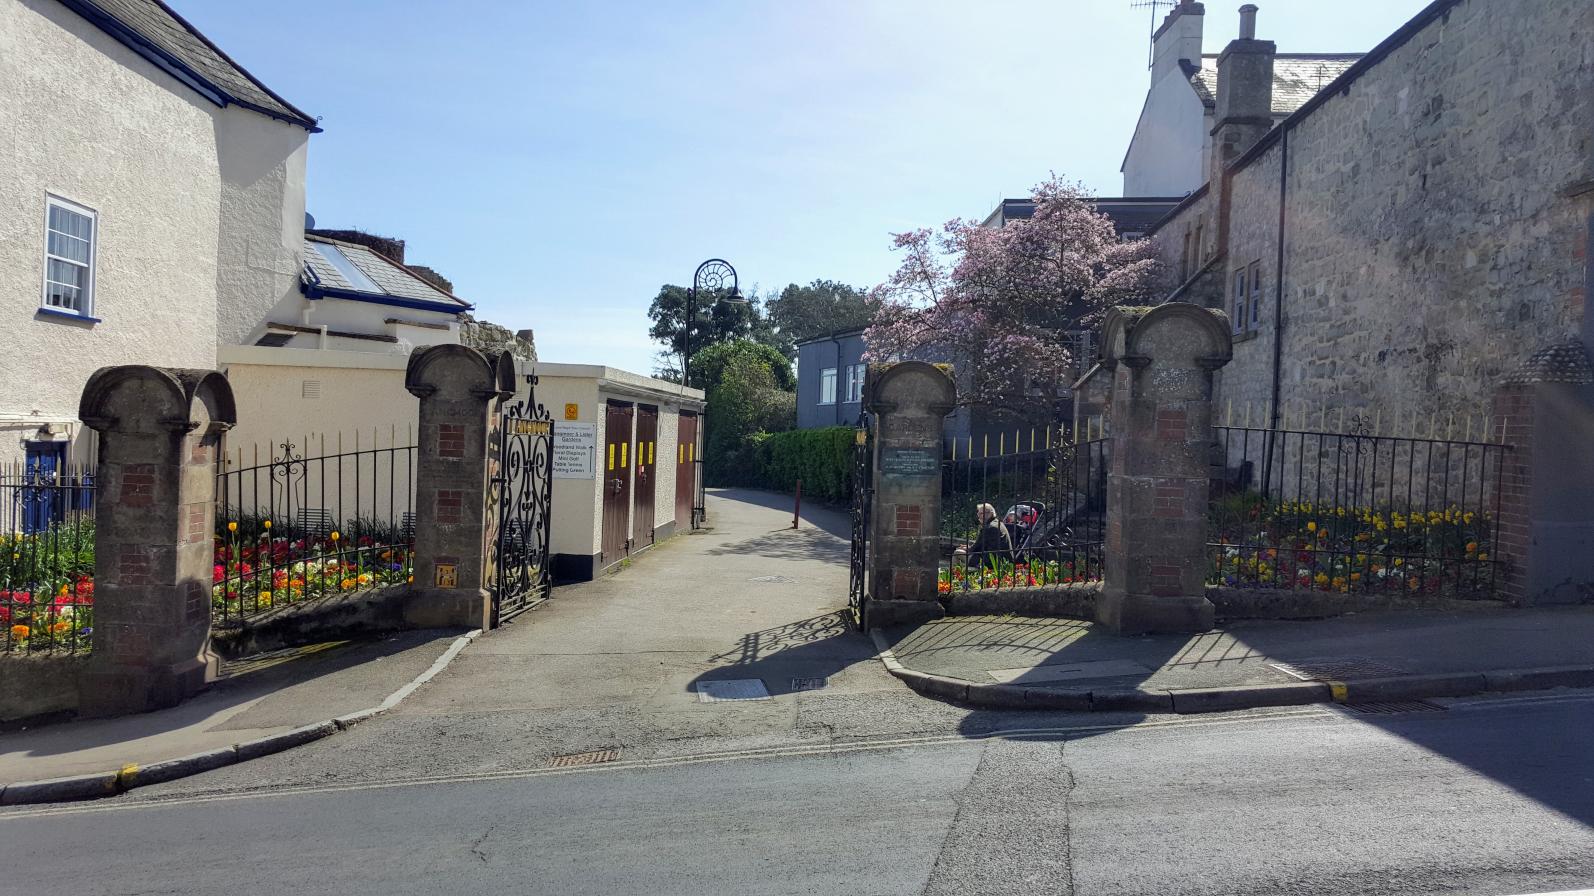 Gated entrance to Langmoor and Lister Gardens in Lyme Regis